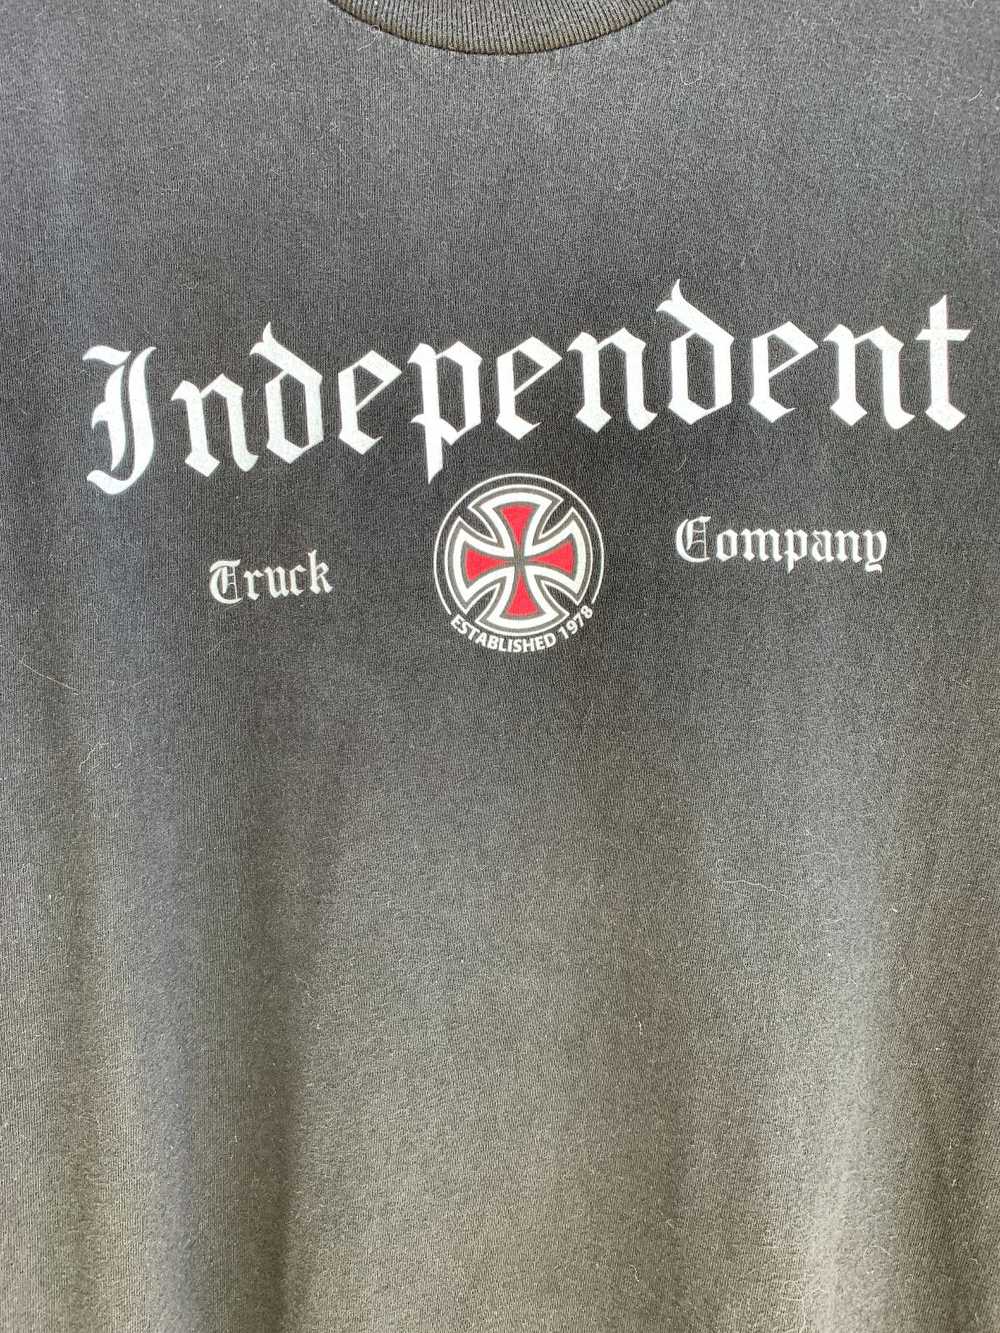 INDEPENDENT SKATE TRUCK COMPANY T-SHIRT - image 3